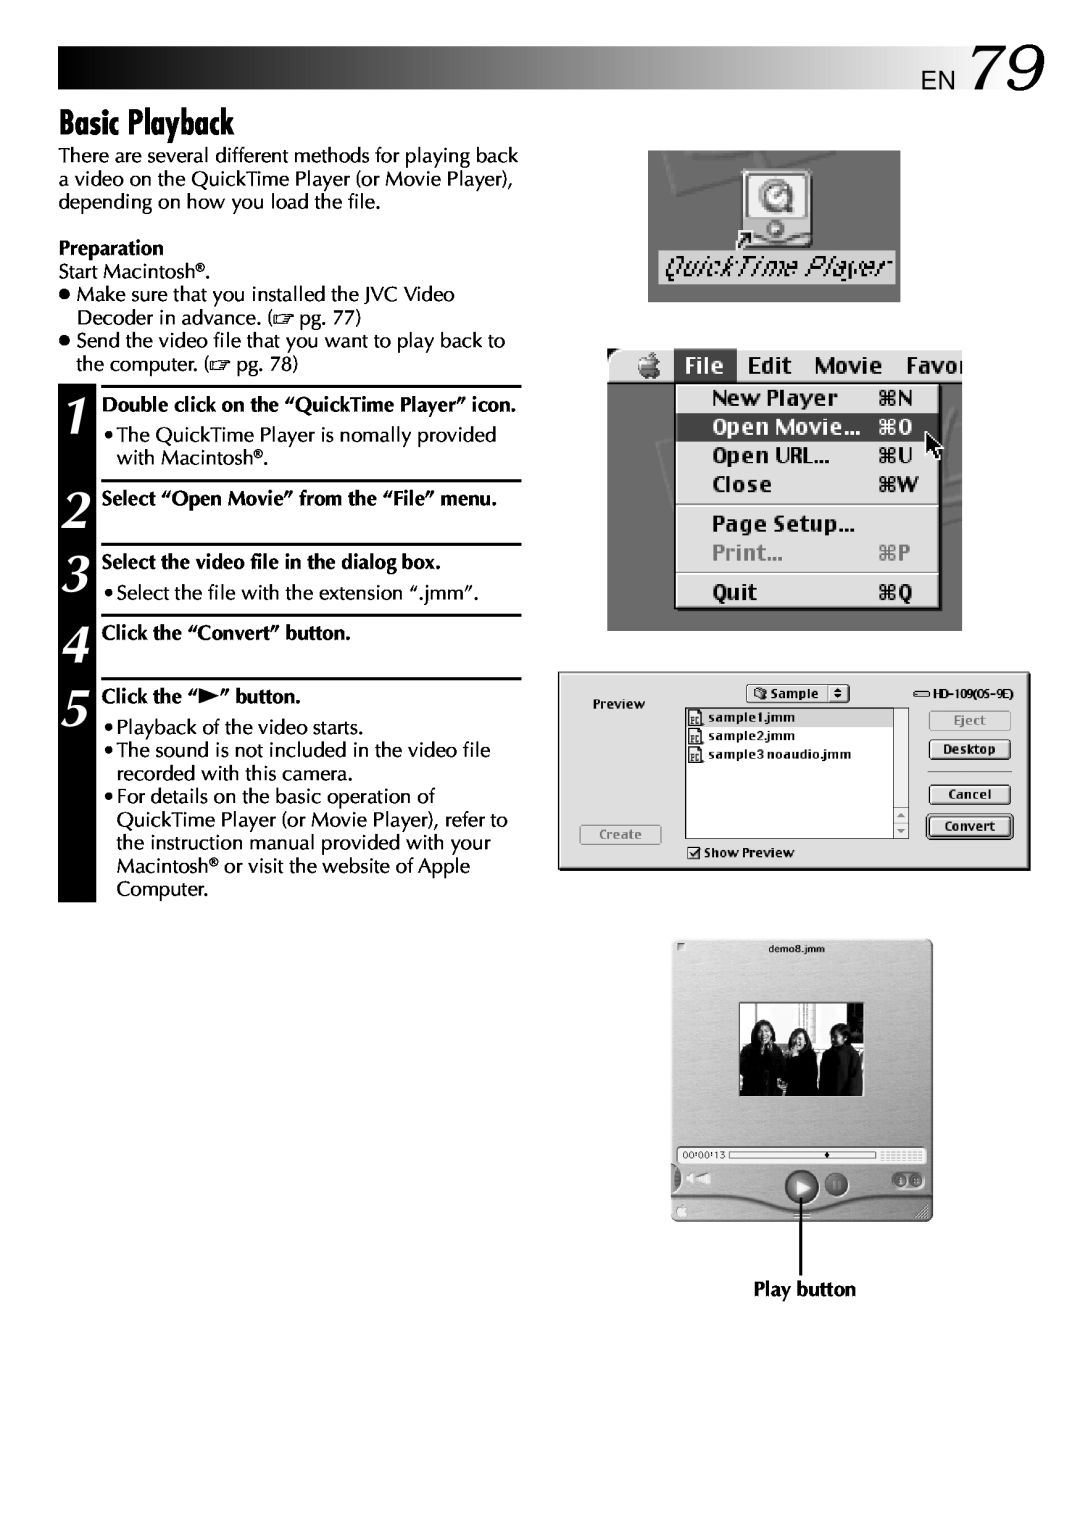 JVC GC-QX3 manual EN79, Basic Playback, Preparation, Select “Open Movie” from the “File” menu, Click the “Convert” button 